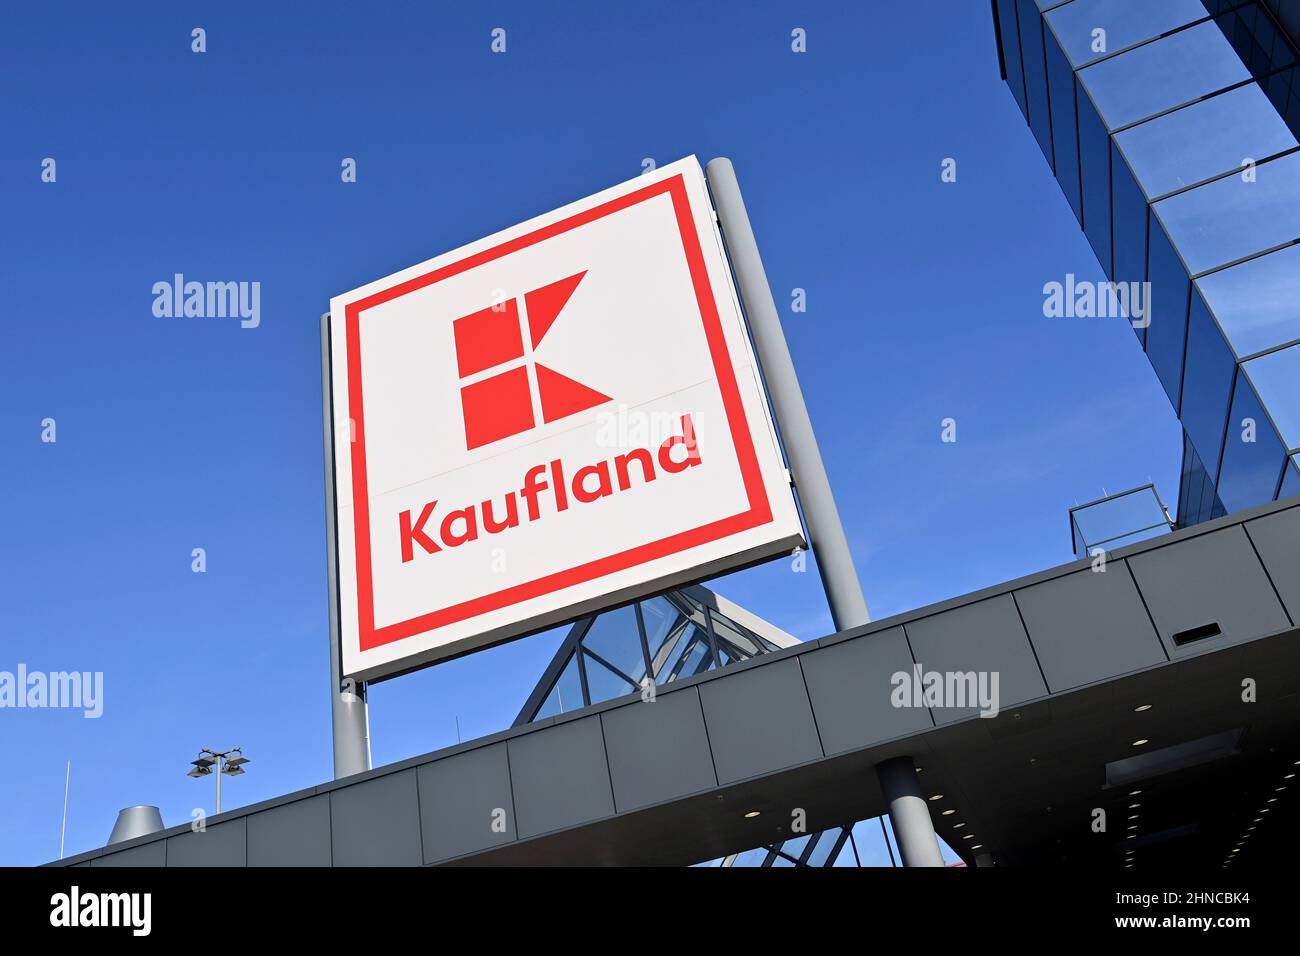 Kaufland Logo High Resolution Stock Photography and Images - Alamy